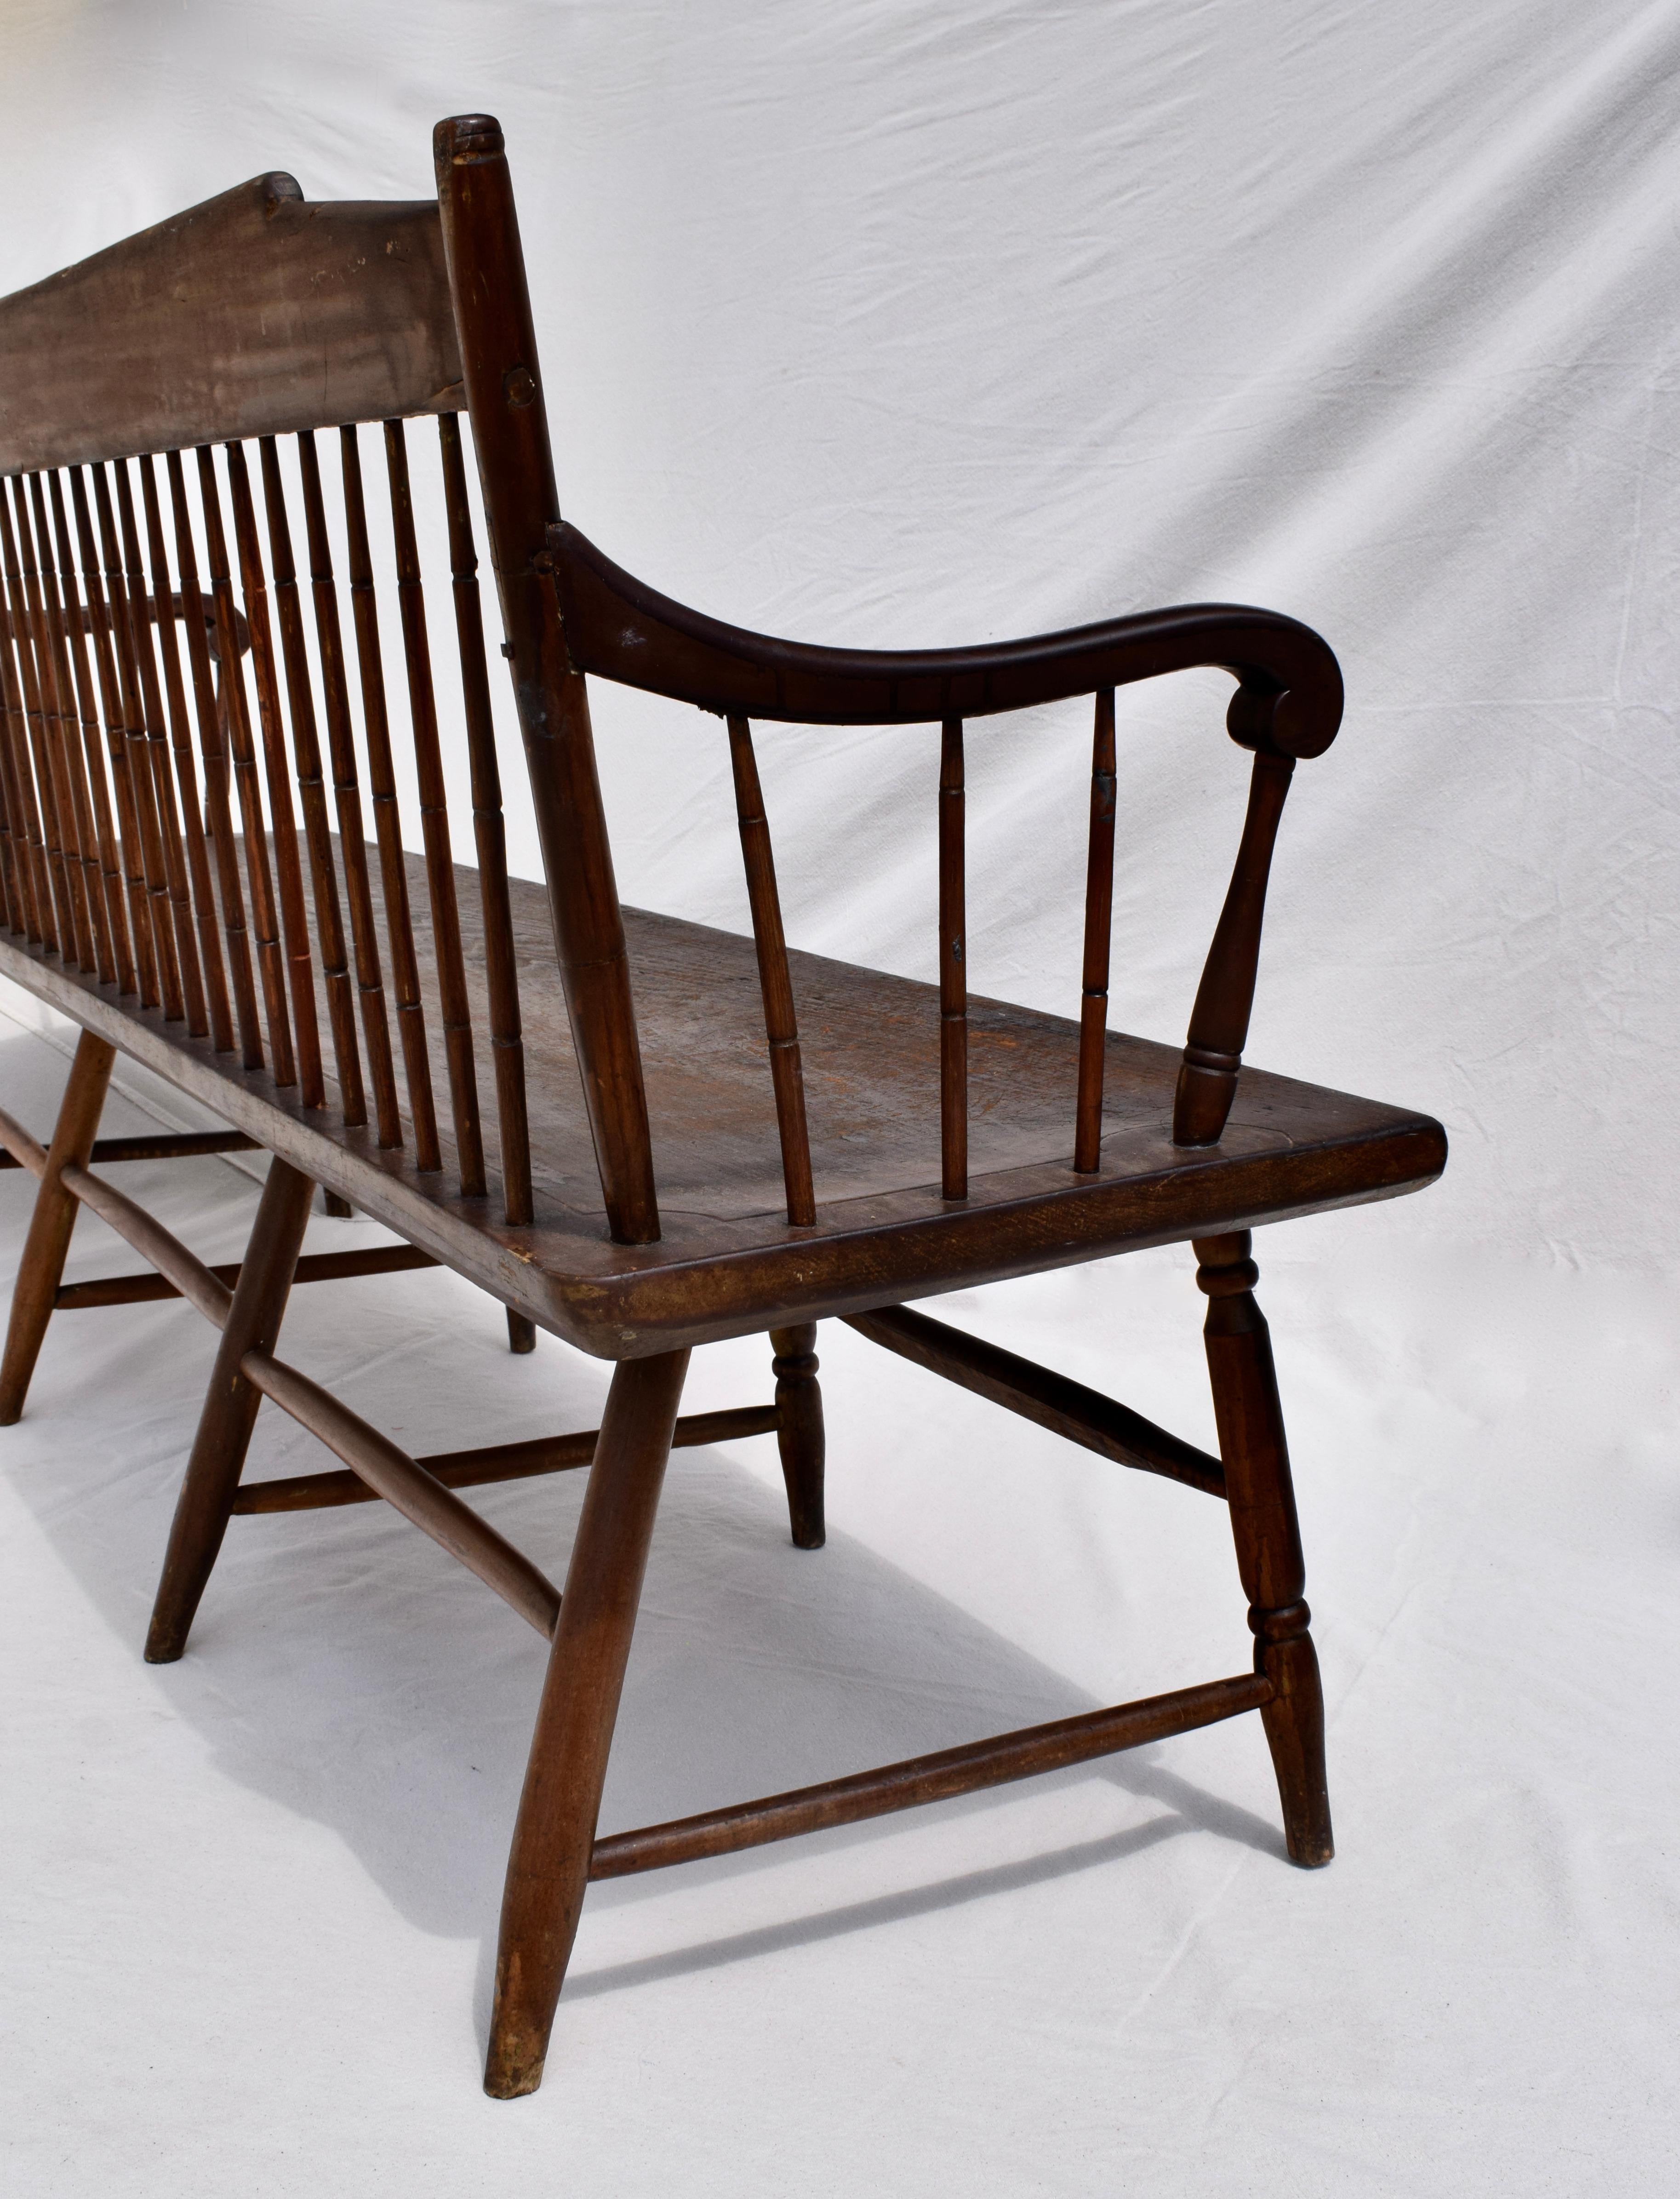 American Windsor Bench Early 19th C. 7